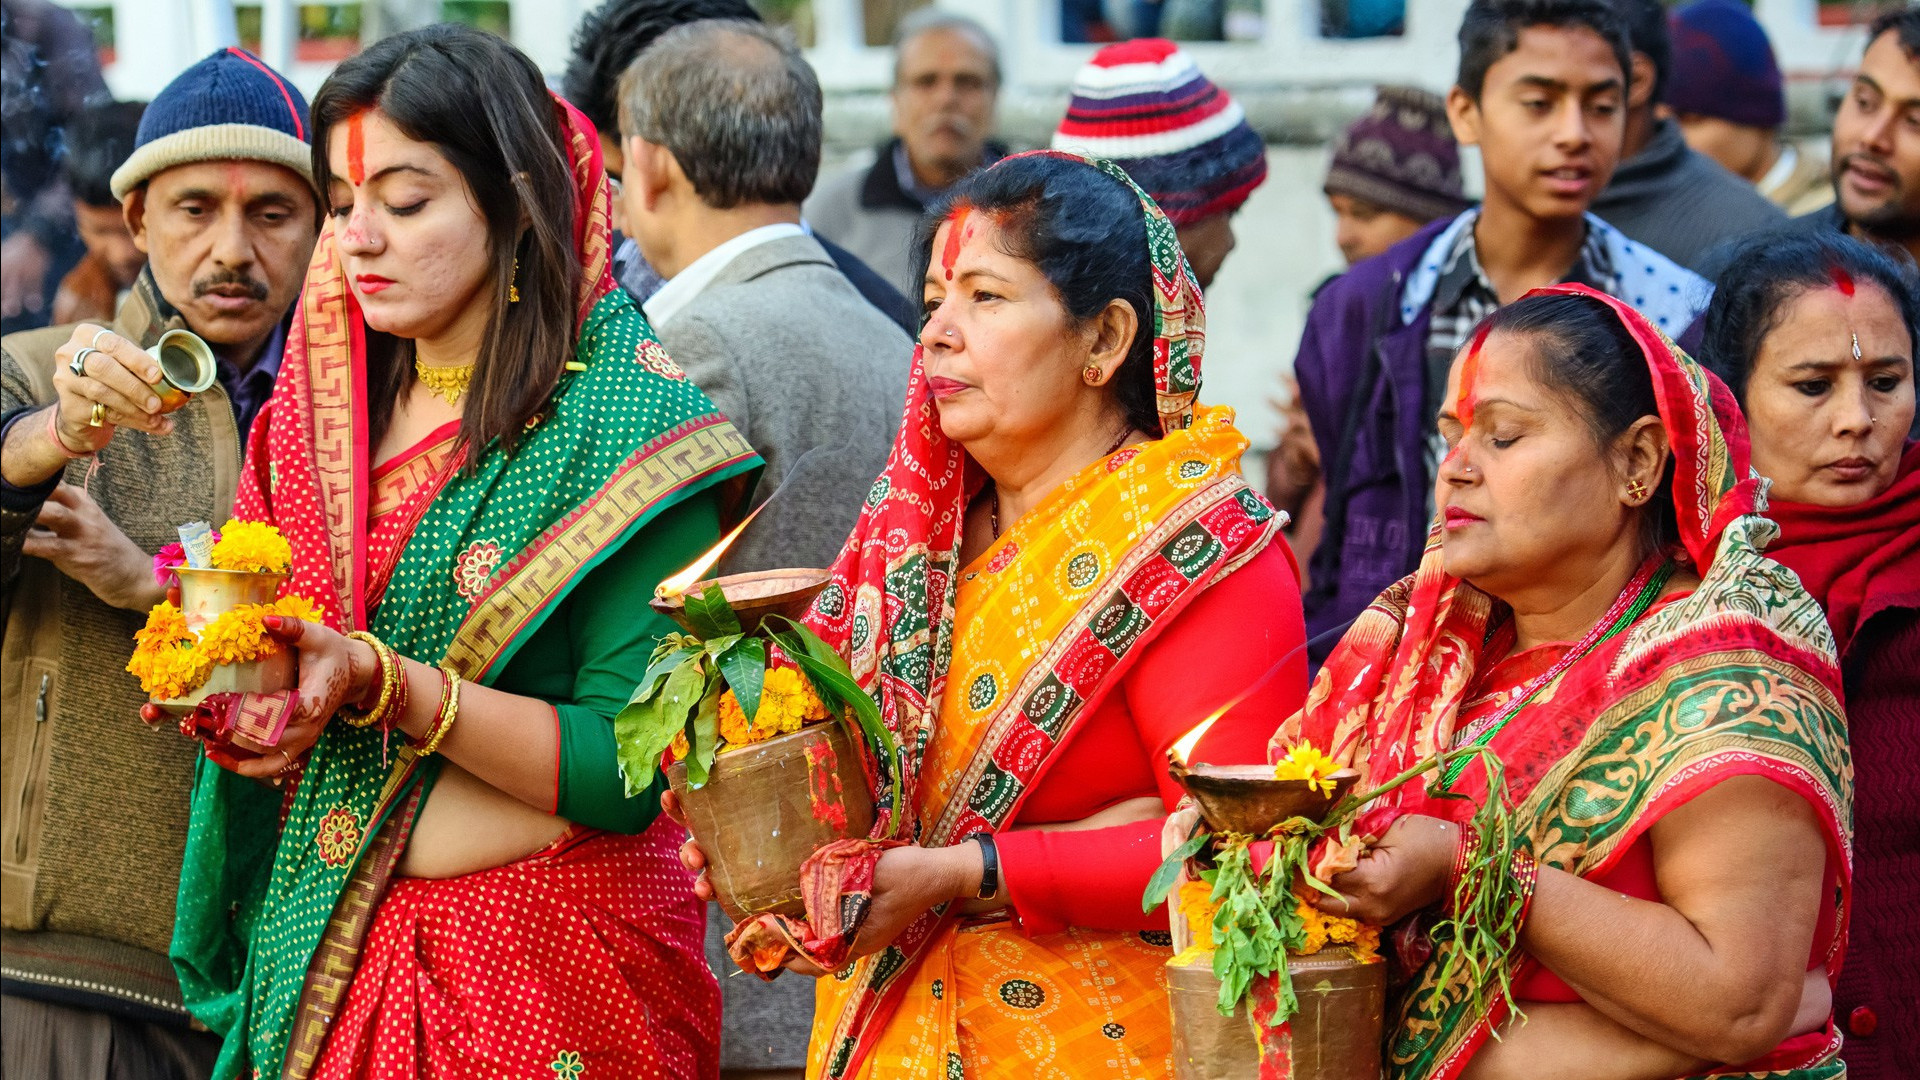 Chhath Festival Celebration in Nepal | Chhath History and Importance